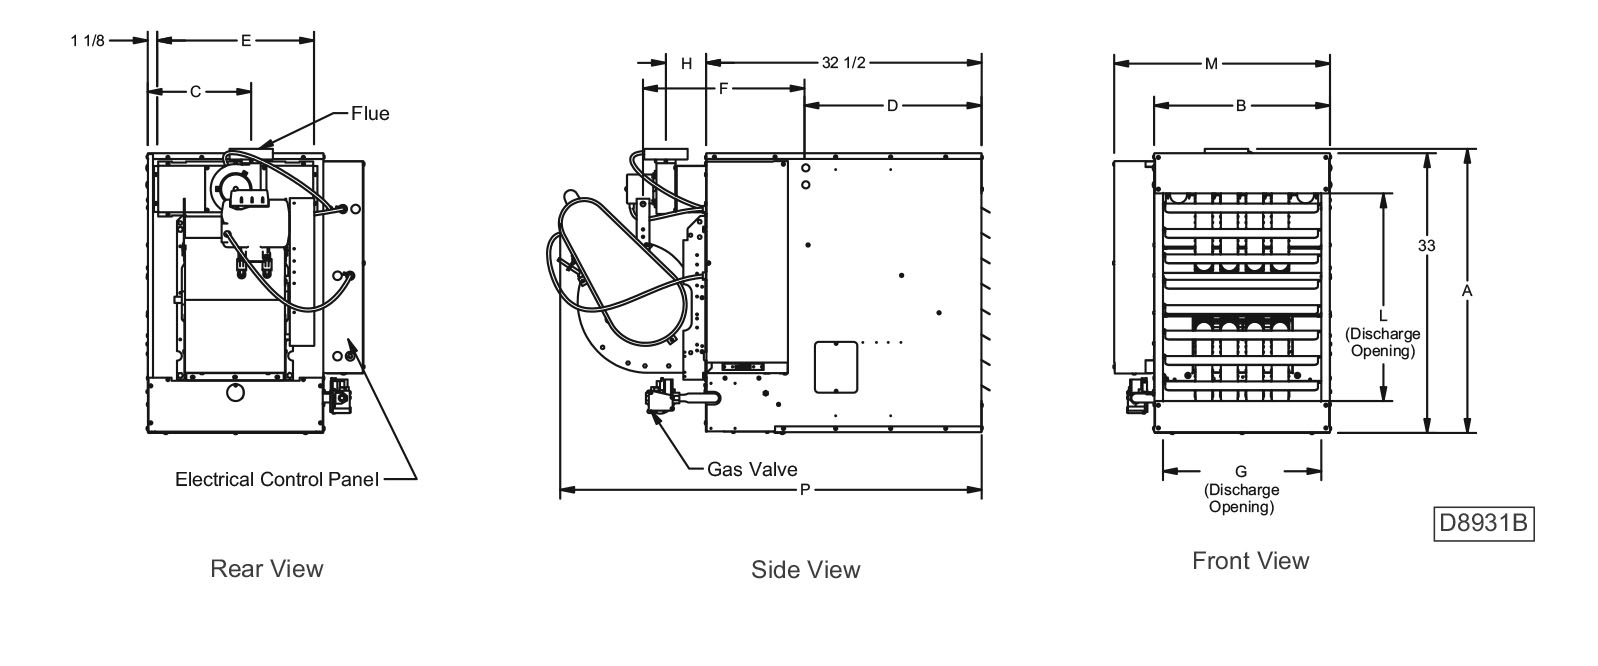 BTC Series Tubular Blower Unit Heater Performance and Dimensional Data Drawings